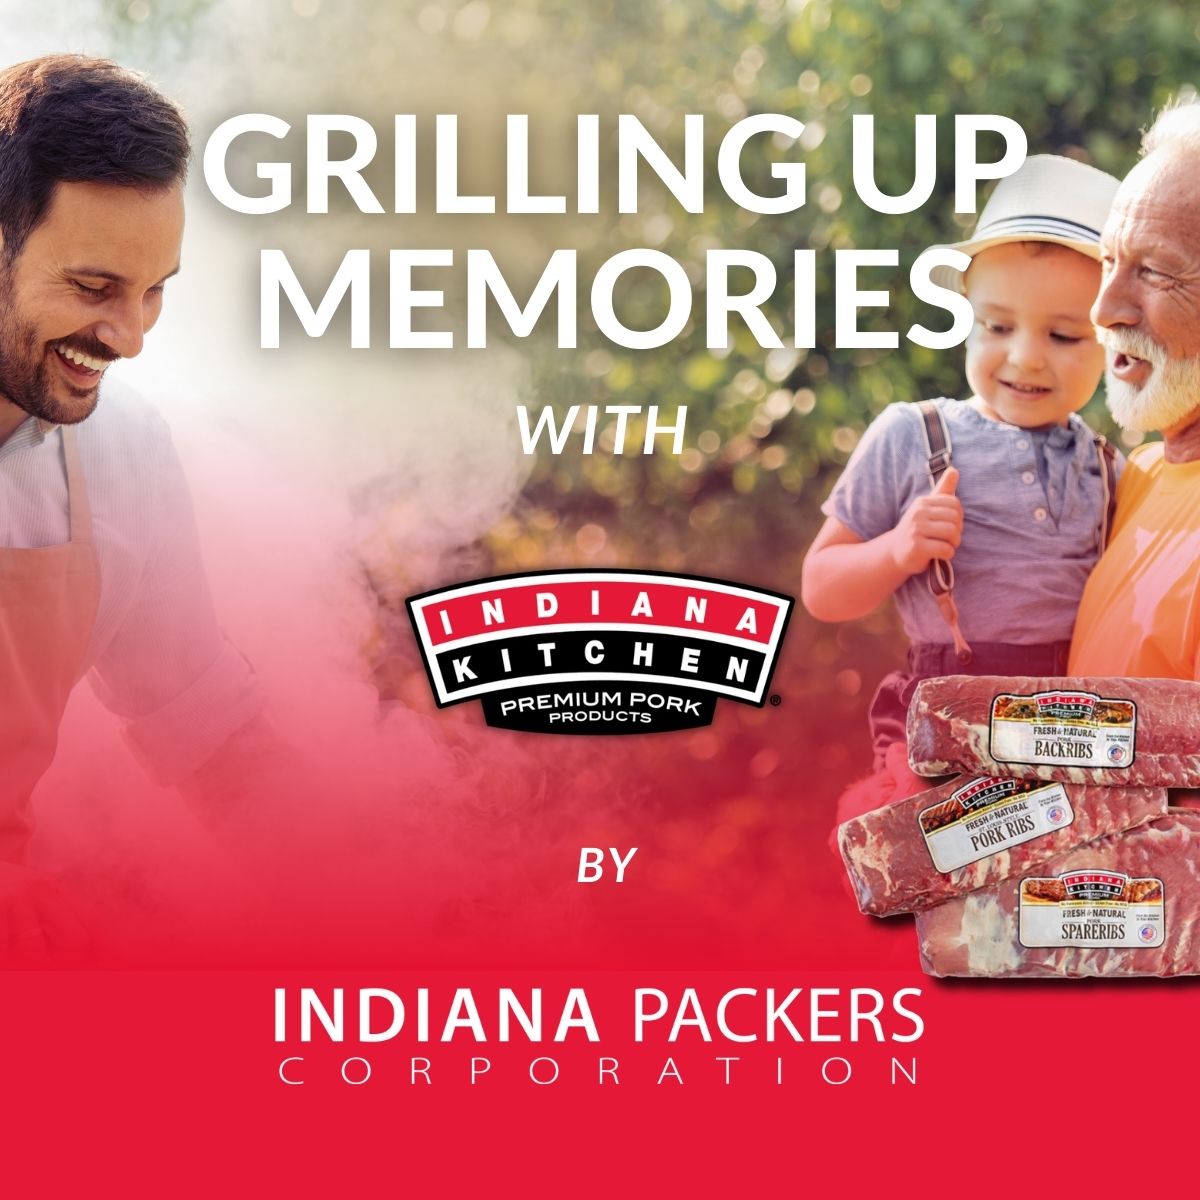 Create unforgettable memories with Indiana Kitchen, proudly made by Indiana Packers. 

Our premium meats are the perfect addition to any grilling session, offering a delicious taste and high quality that you can trust.

#indianakitchen #grilling #premiummeats #indiana #quality